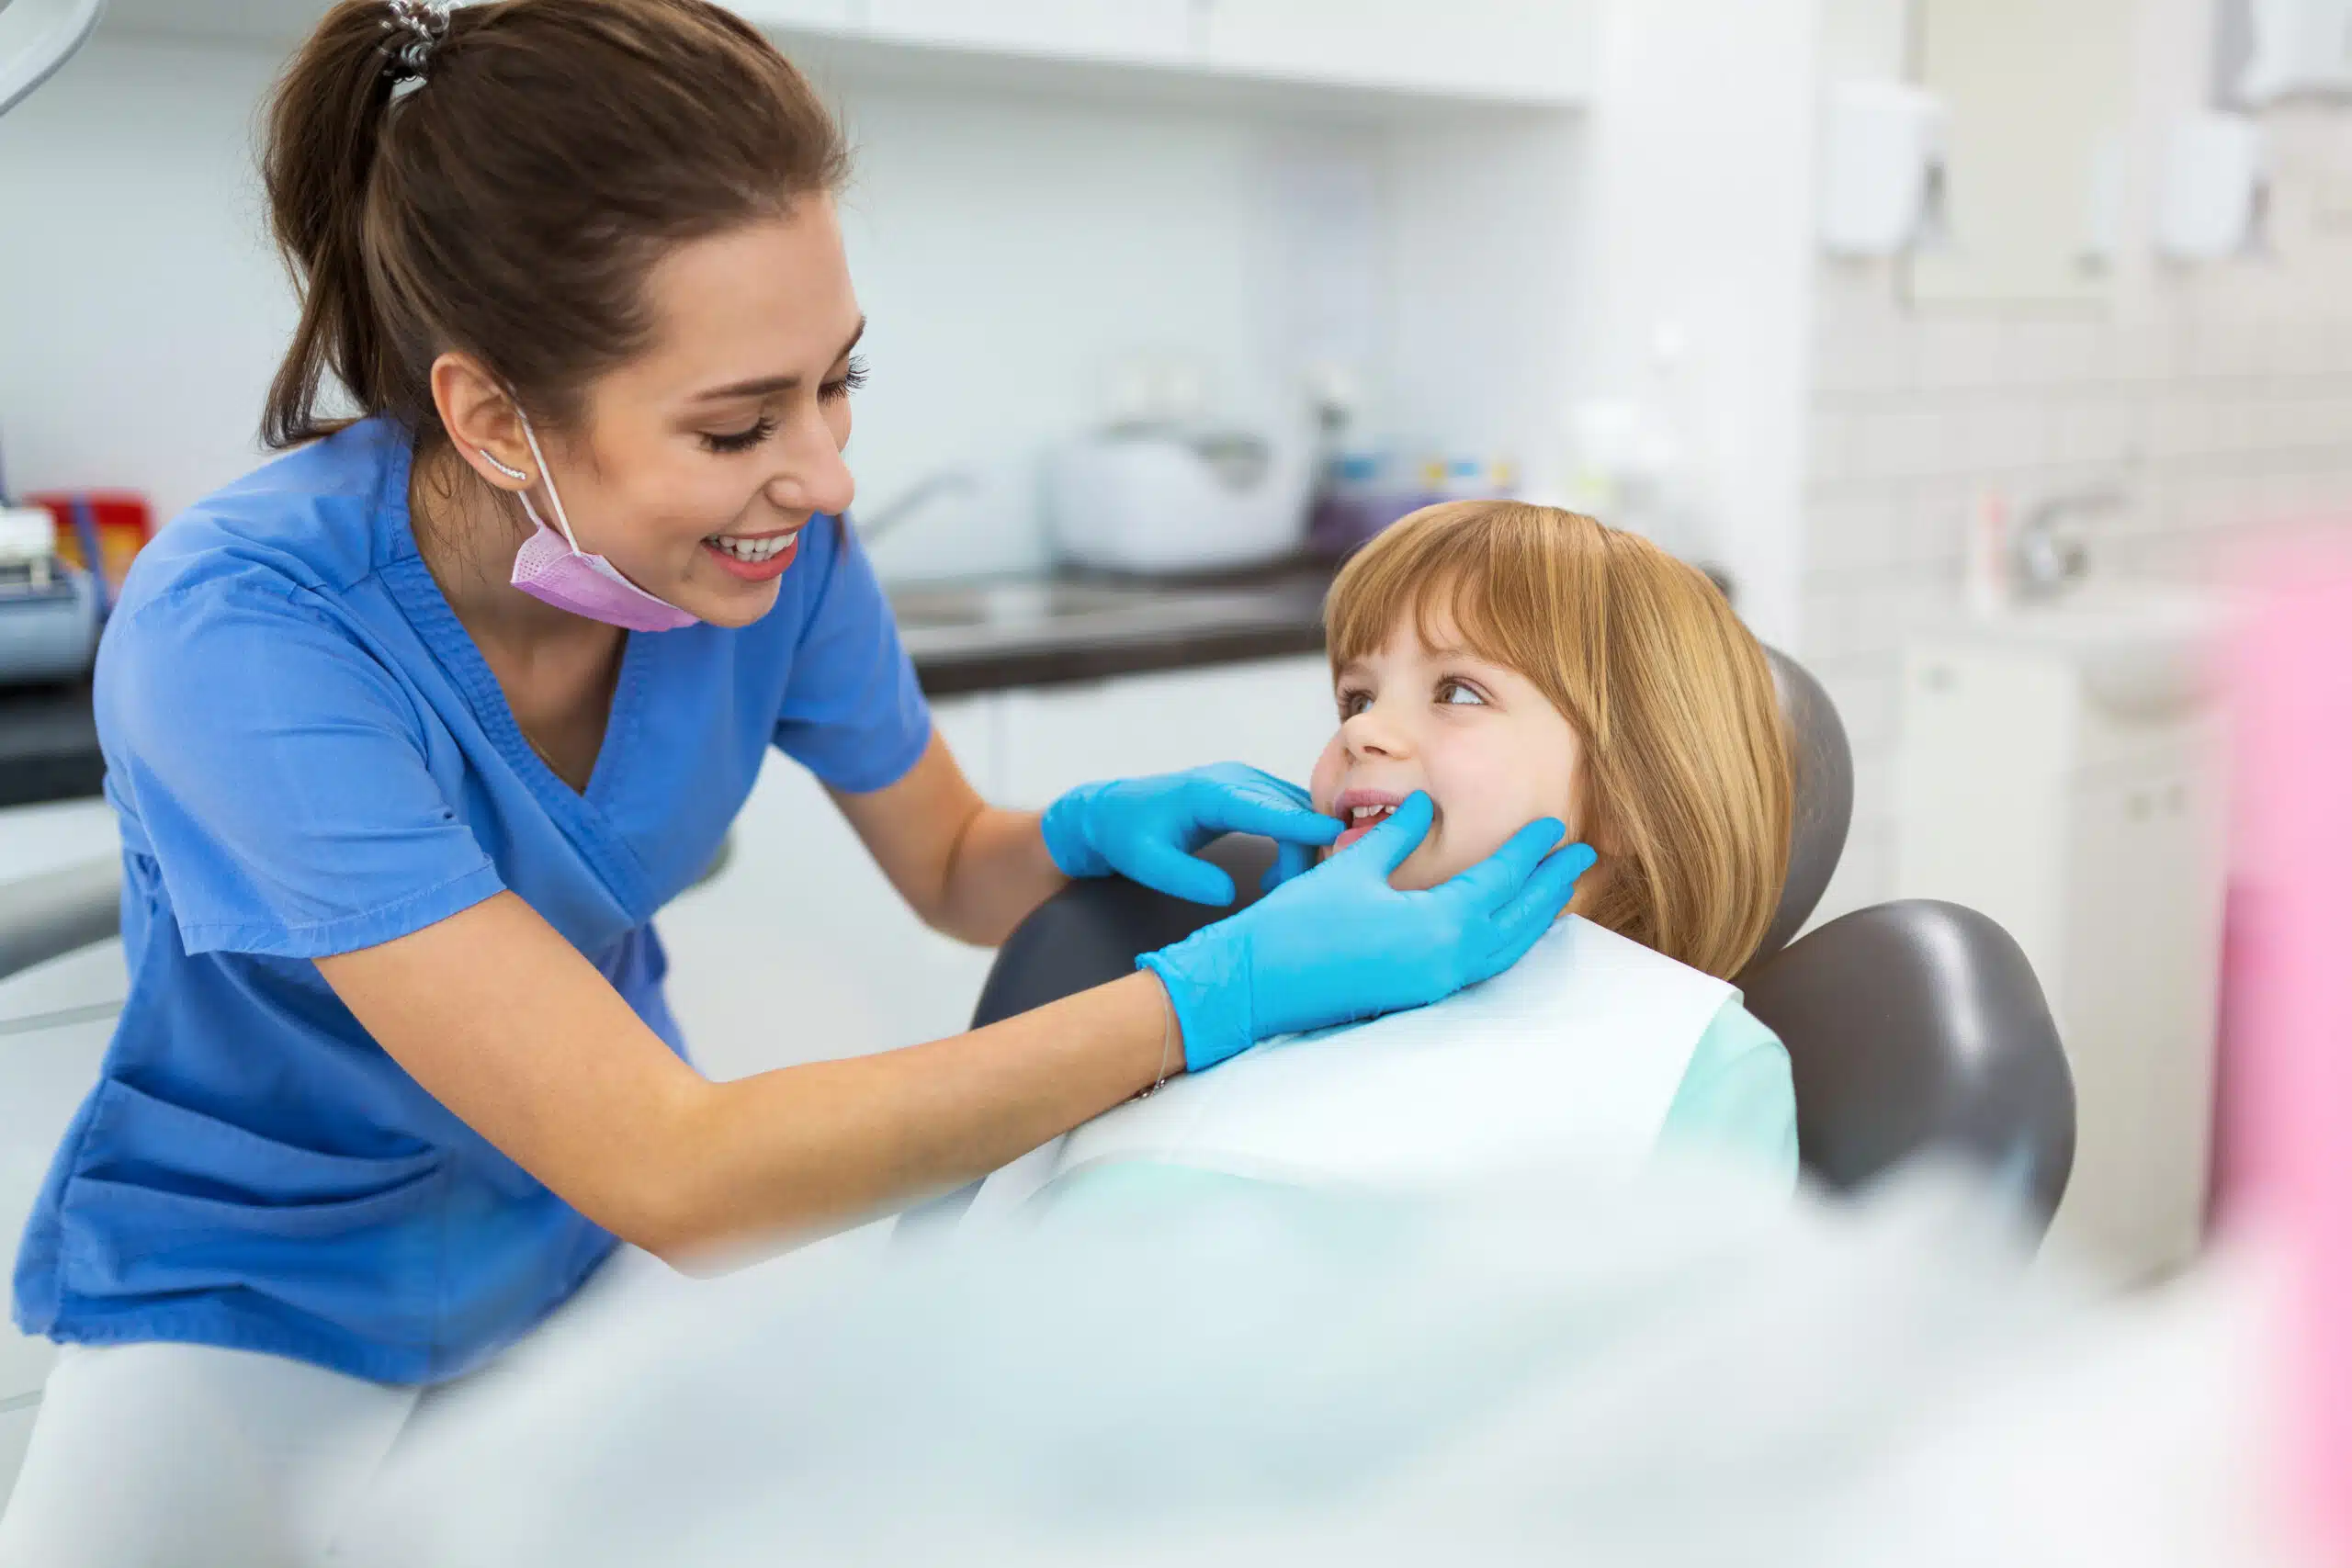 A frenectomy is a minor surgical procedure that can improve speech and oral function by removing excess tissue in the mouth.